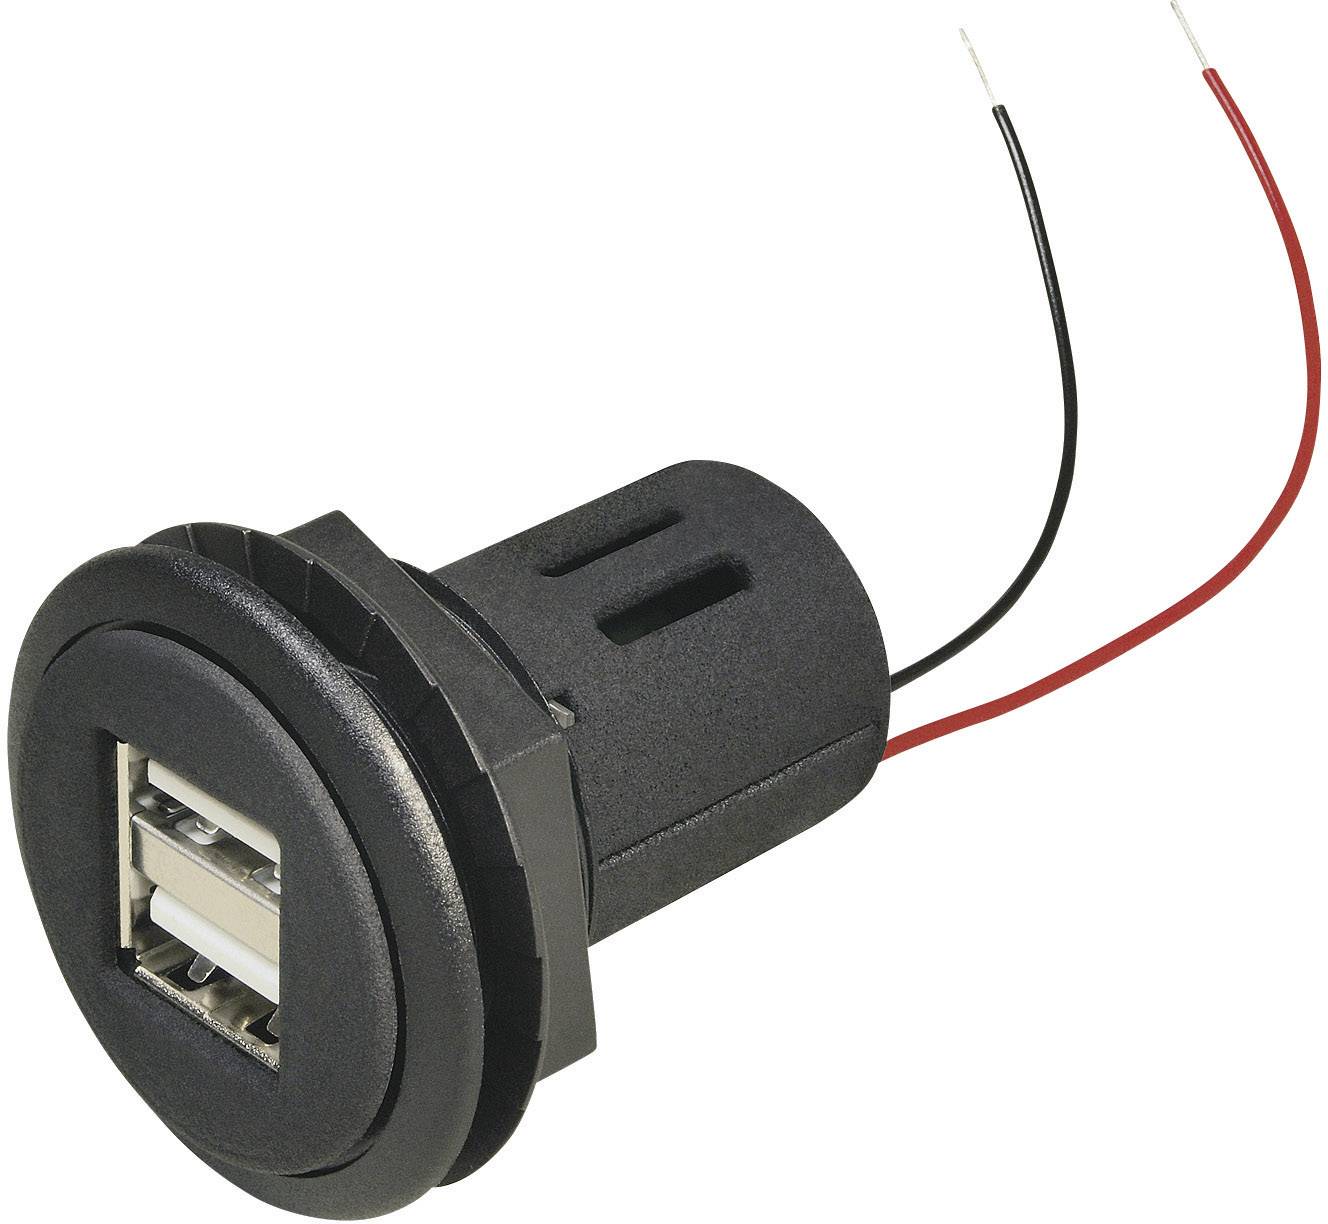 Chargeur voiture USB